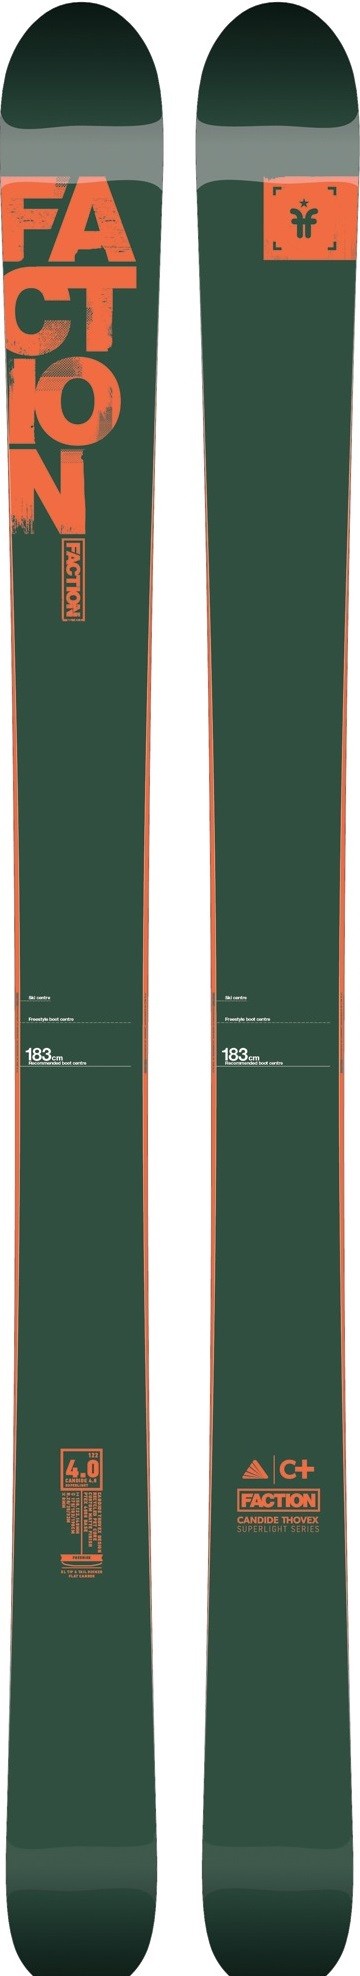 faction candide 40 2013 skis